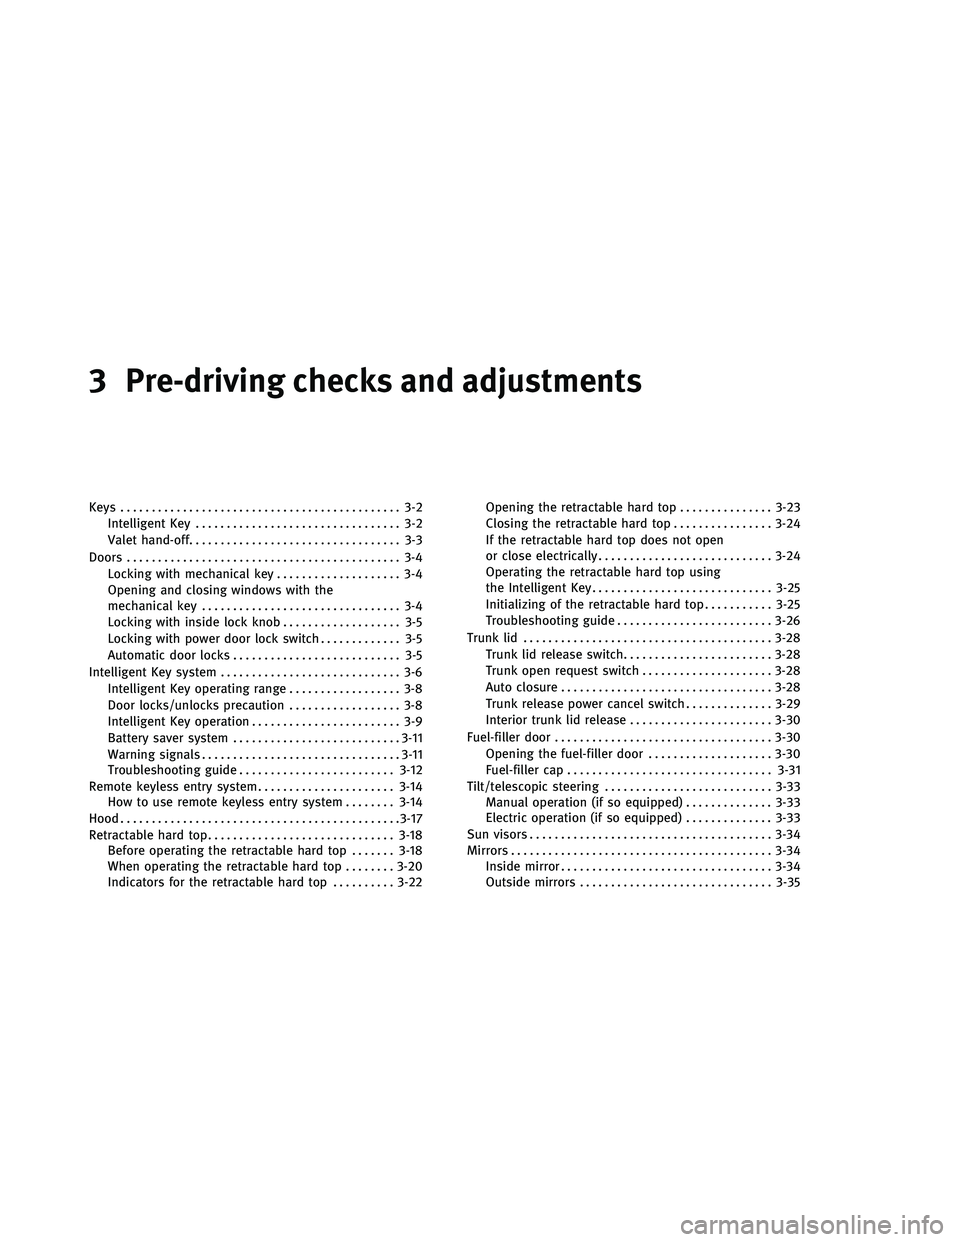 INFINITI G-CONVERTIBLE 2011  Owners Manual 3 Pre-driving checks and adjustments
Keys............................................. 3-2
Intelligent Key ................................. 3-2
Valet hand-off .................................. 3-3
D